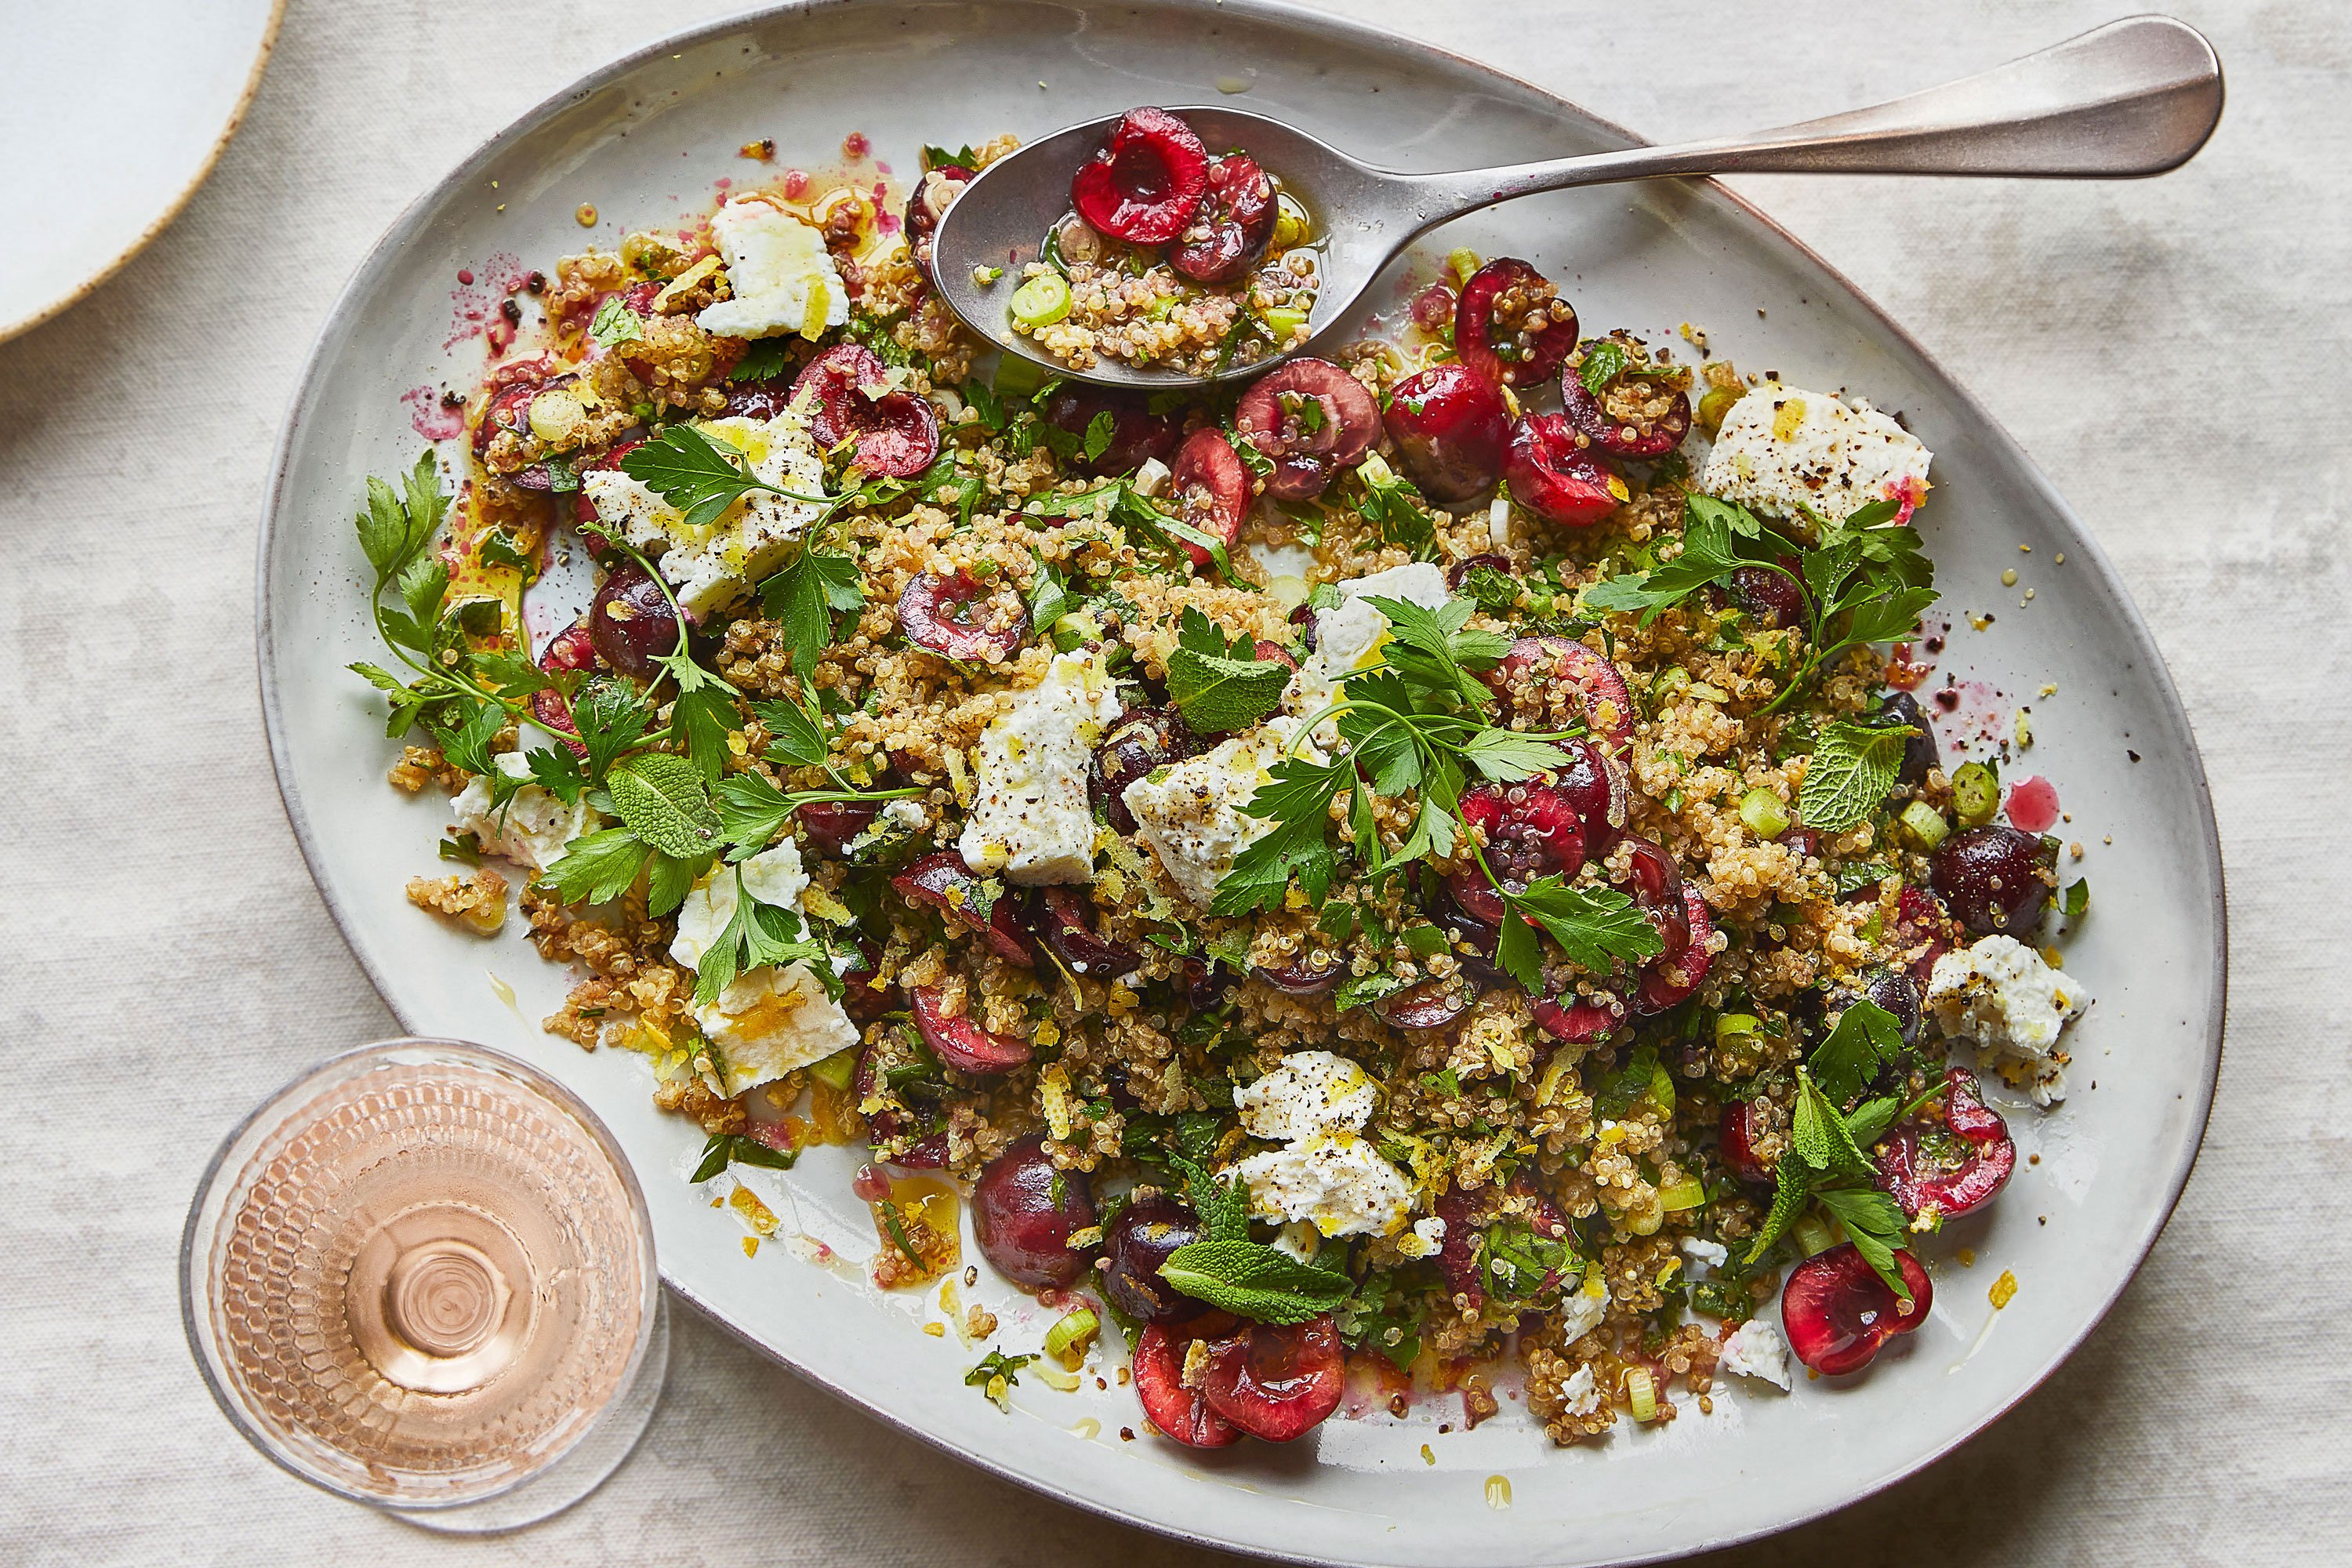 Cherry & quinoa ‘tabbouleh’ with goat’s cheese